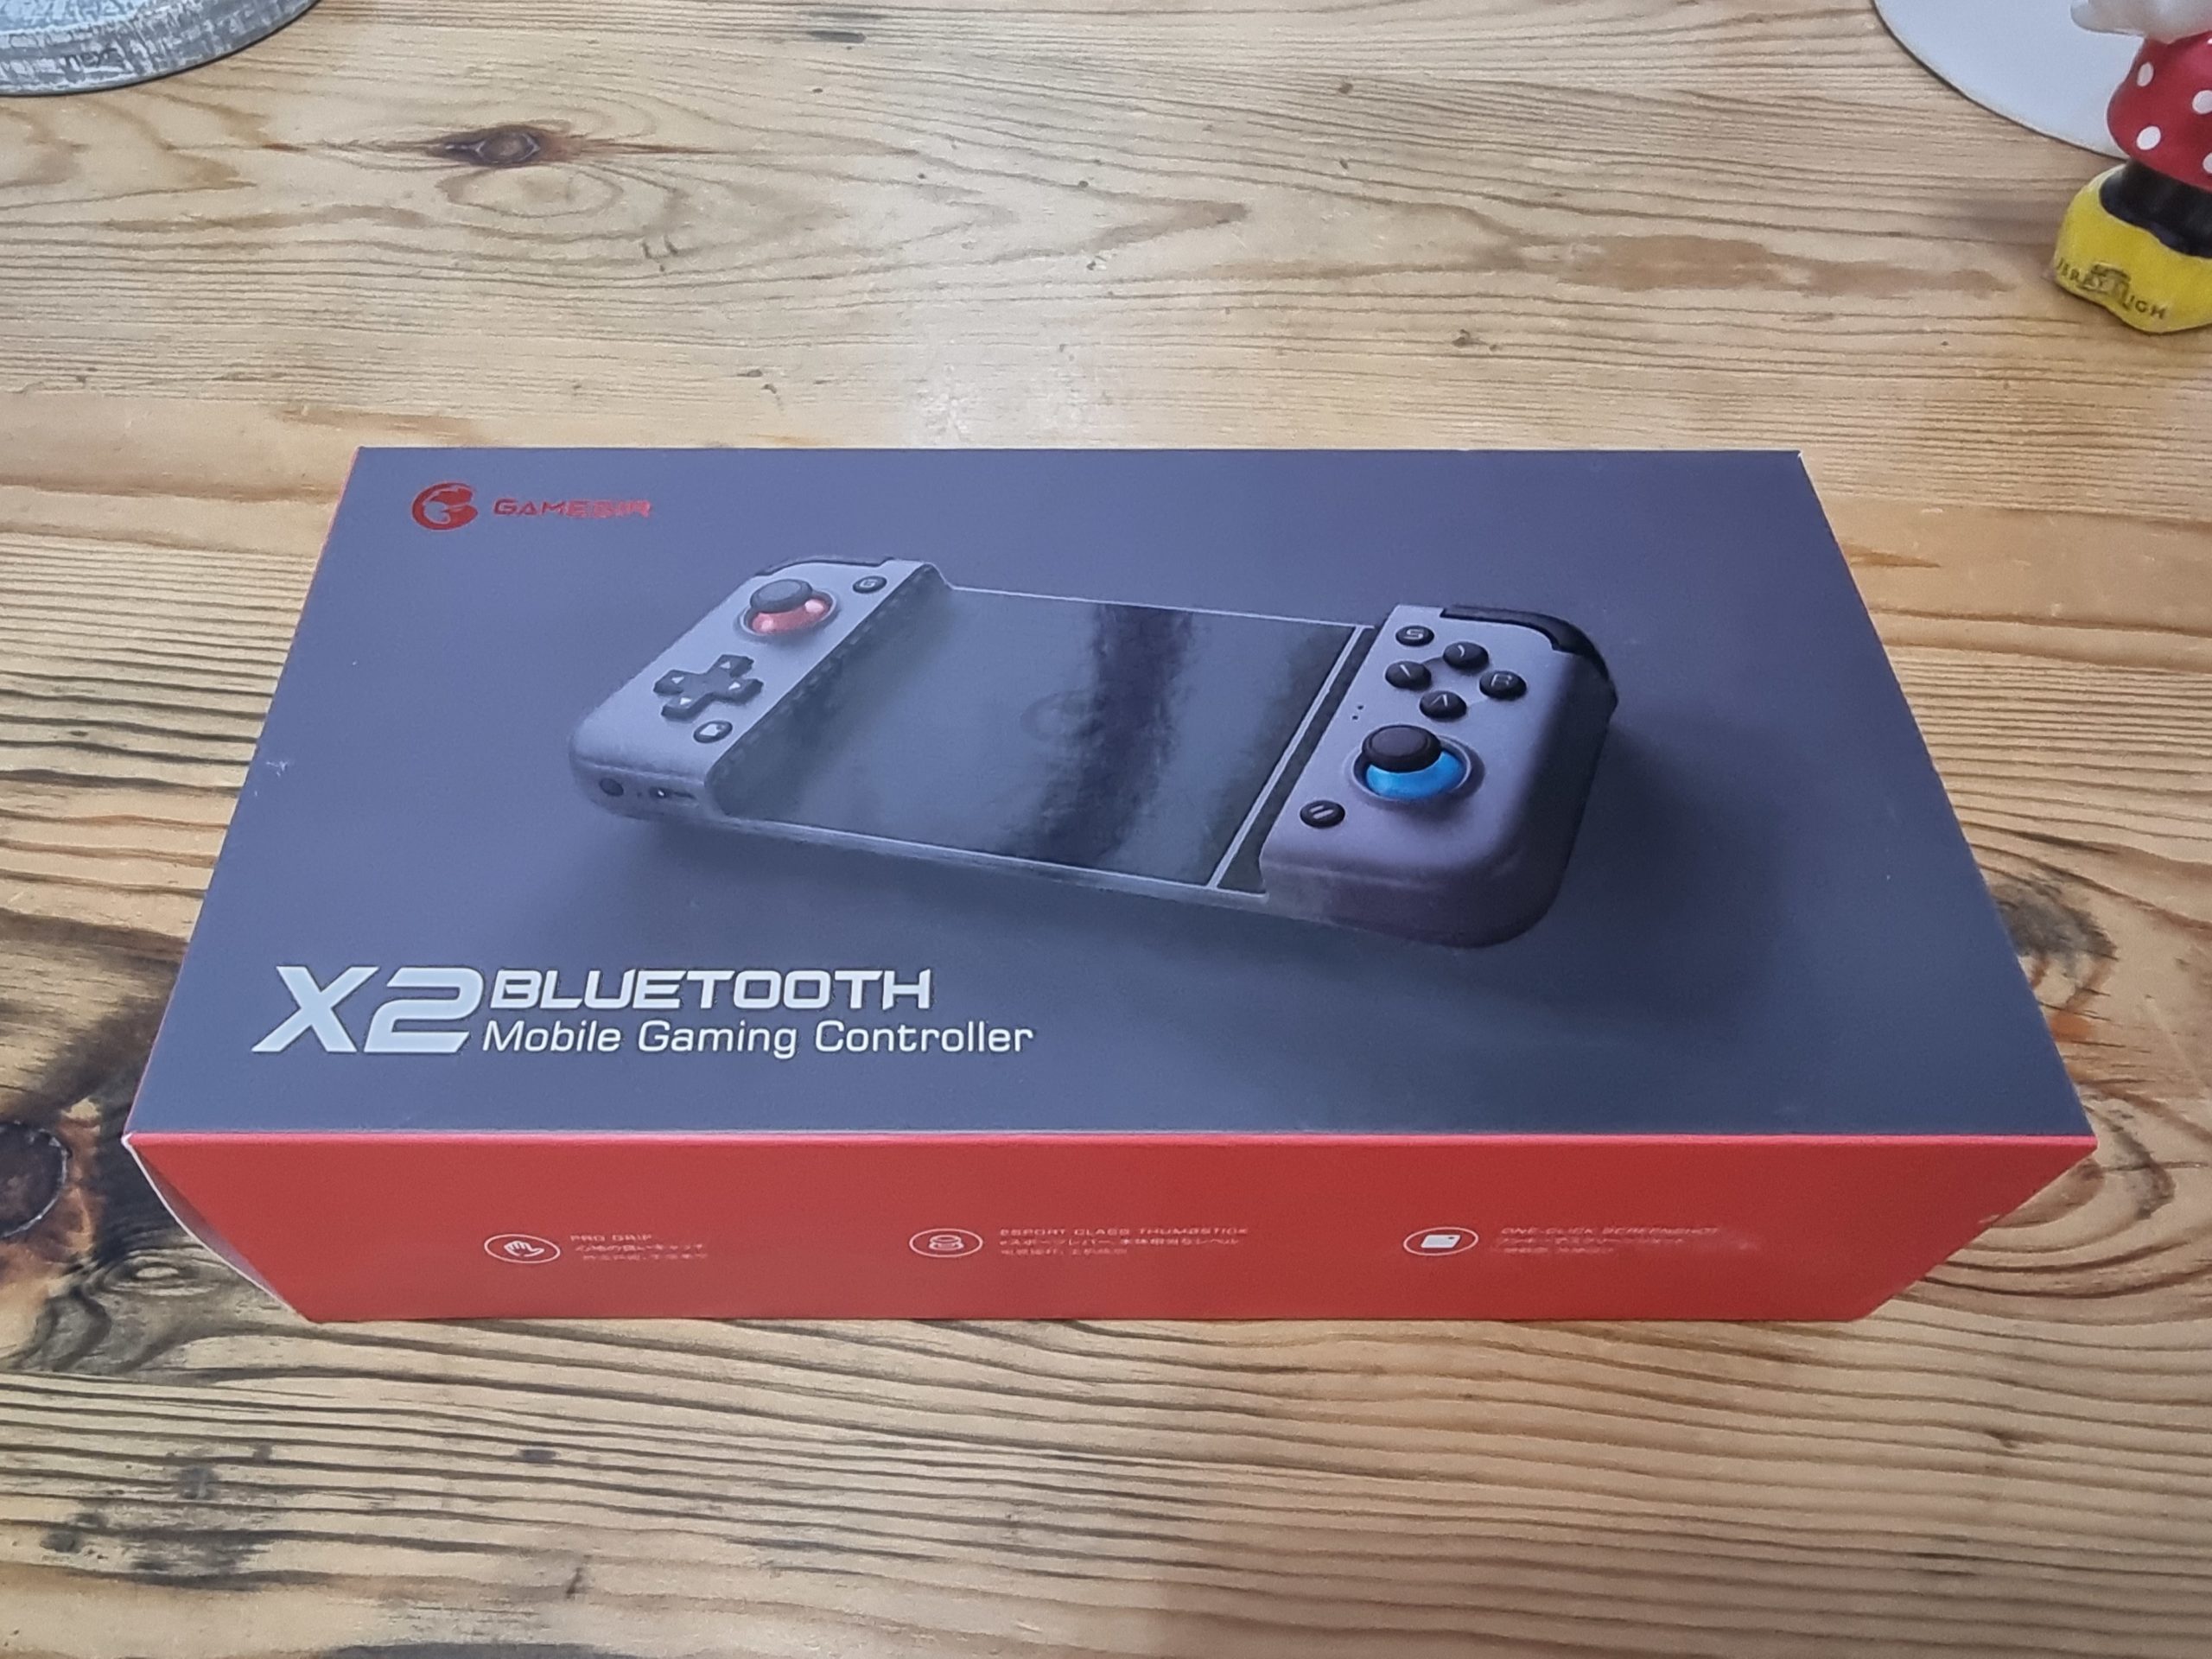 GameSir X2 smartphone Bluetooth gaming controller review - The